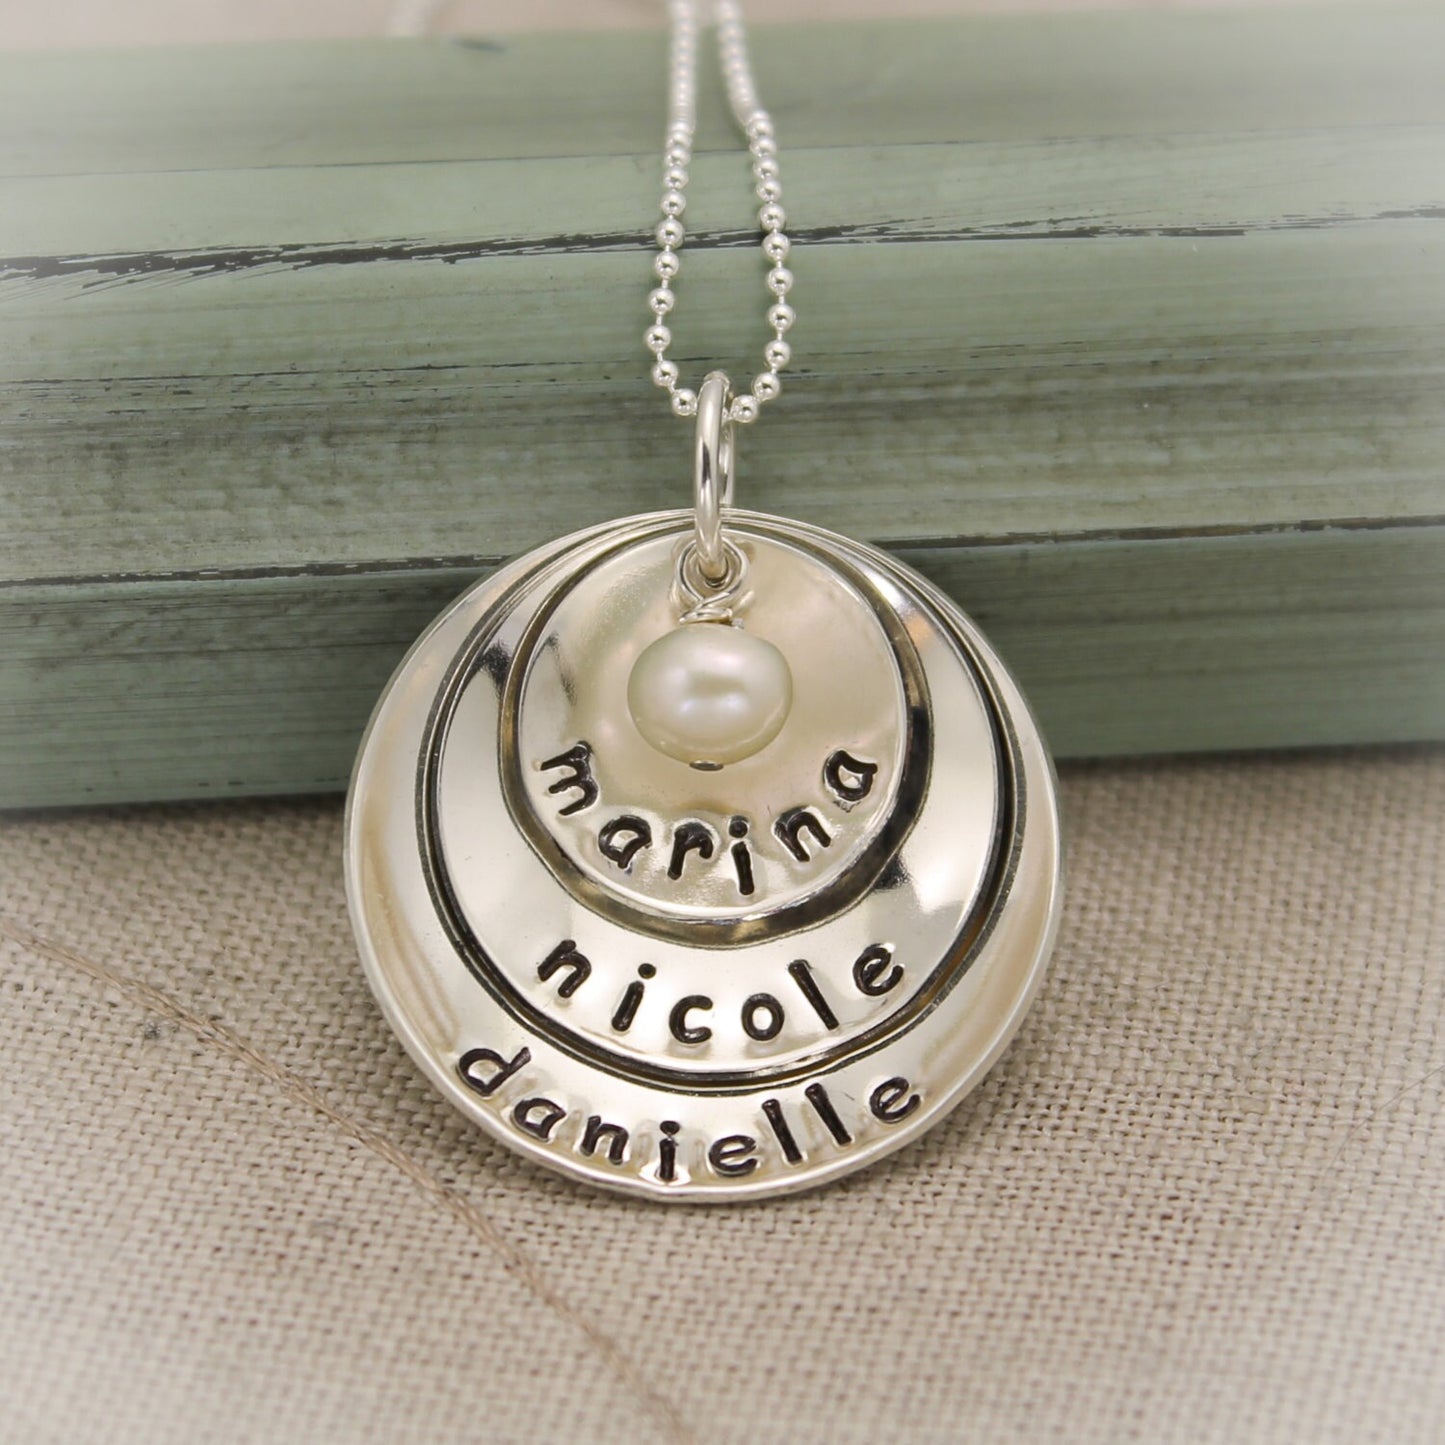 Grandma or Mother Layered and Domed Personalized Necklace in Sterling Silver Hand Stamped Jewelry